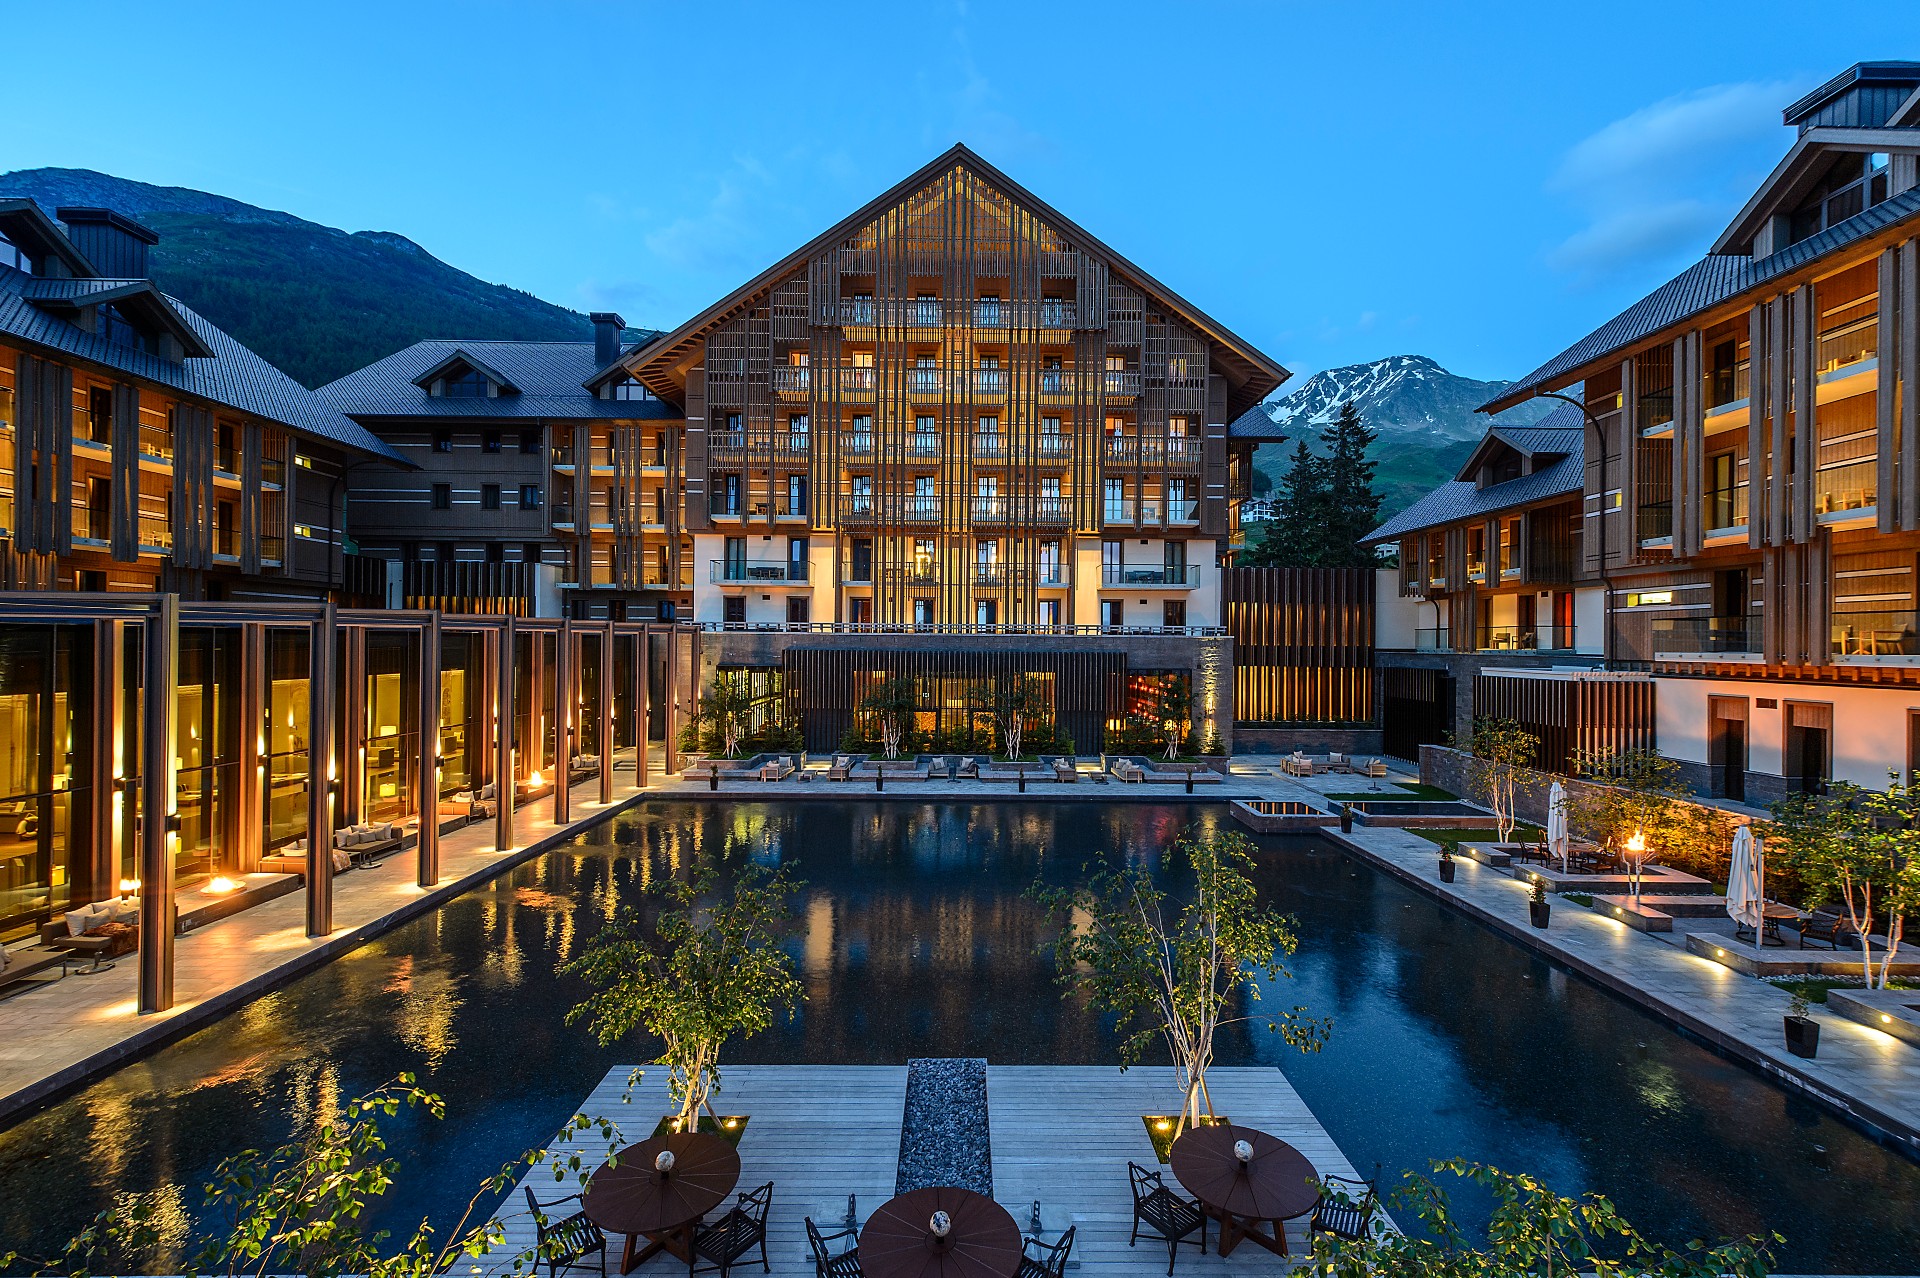 View of The Chedi Andermatt across the outdoor pool. at dusk with illumination of the house.